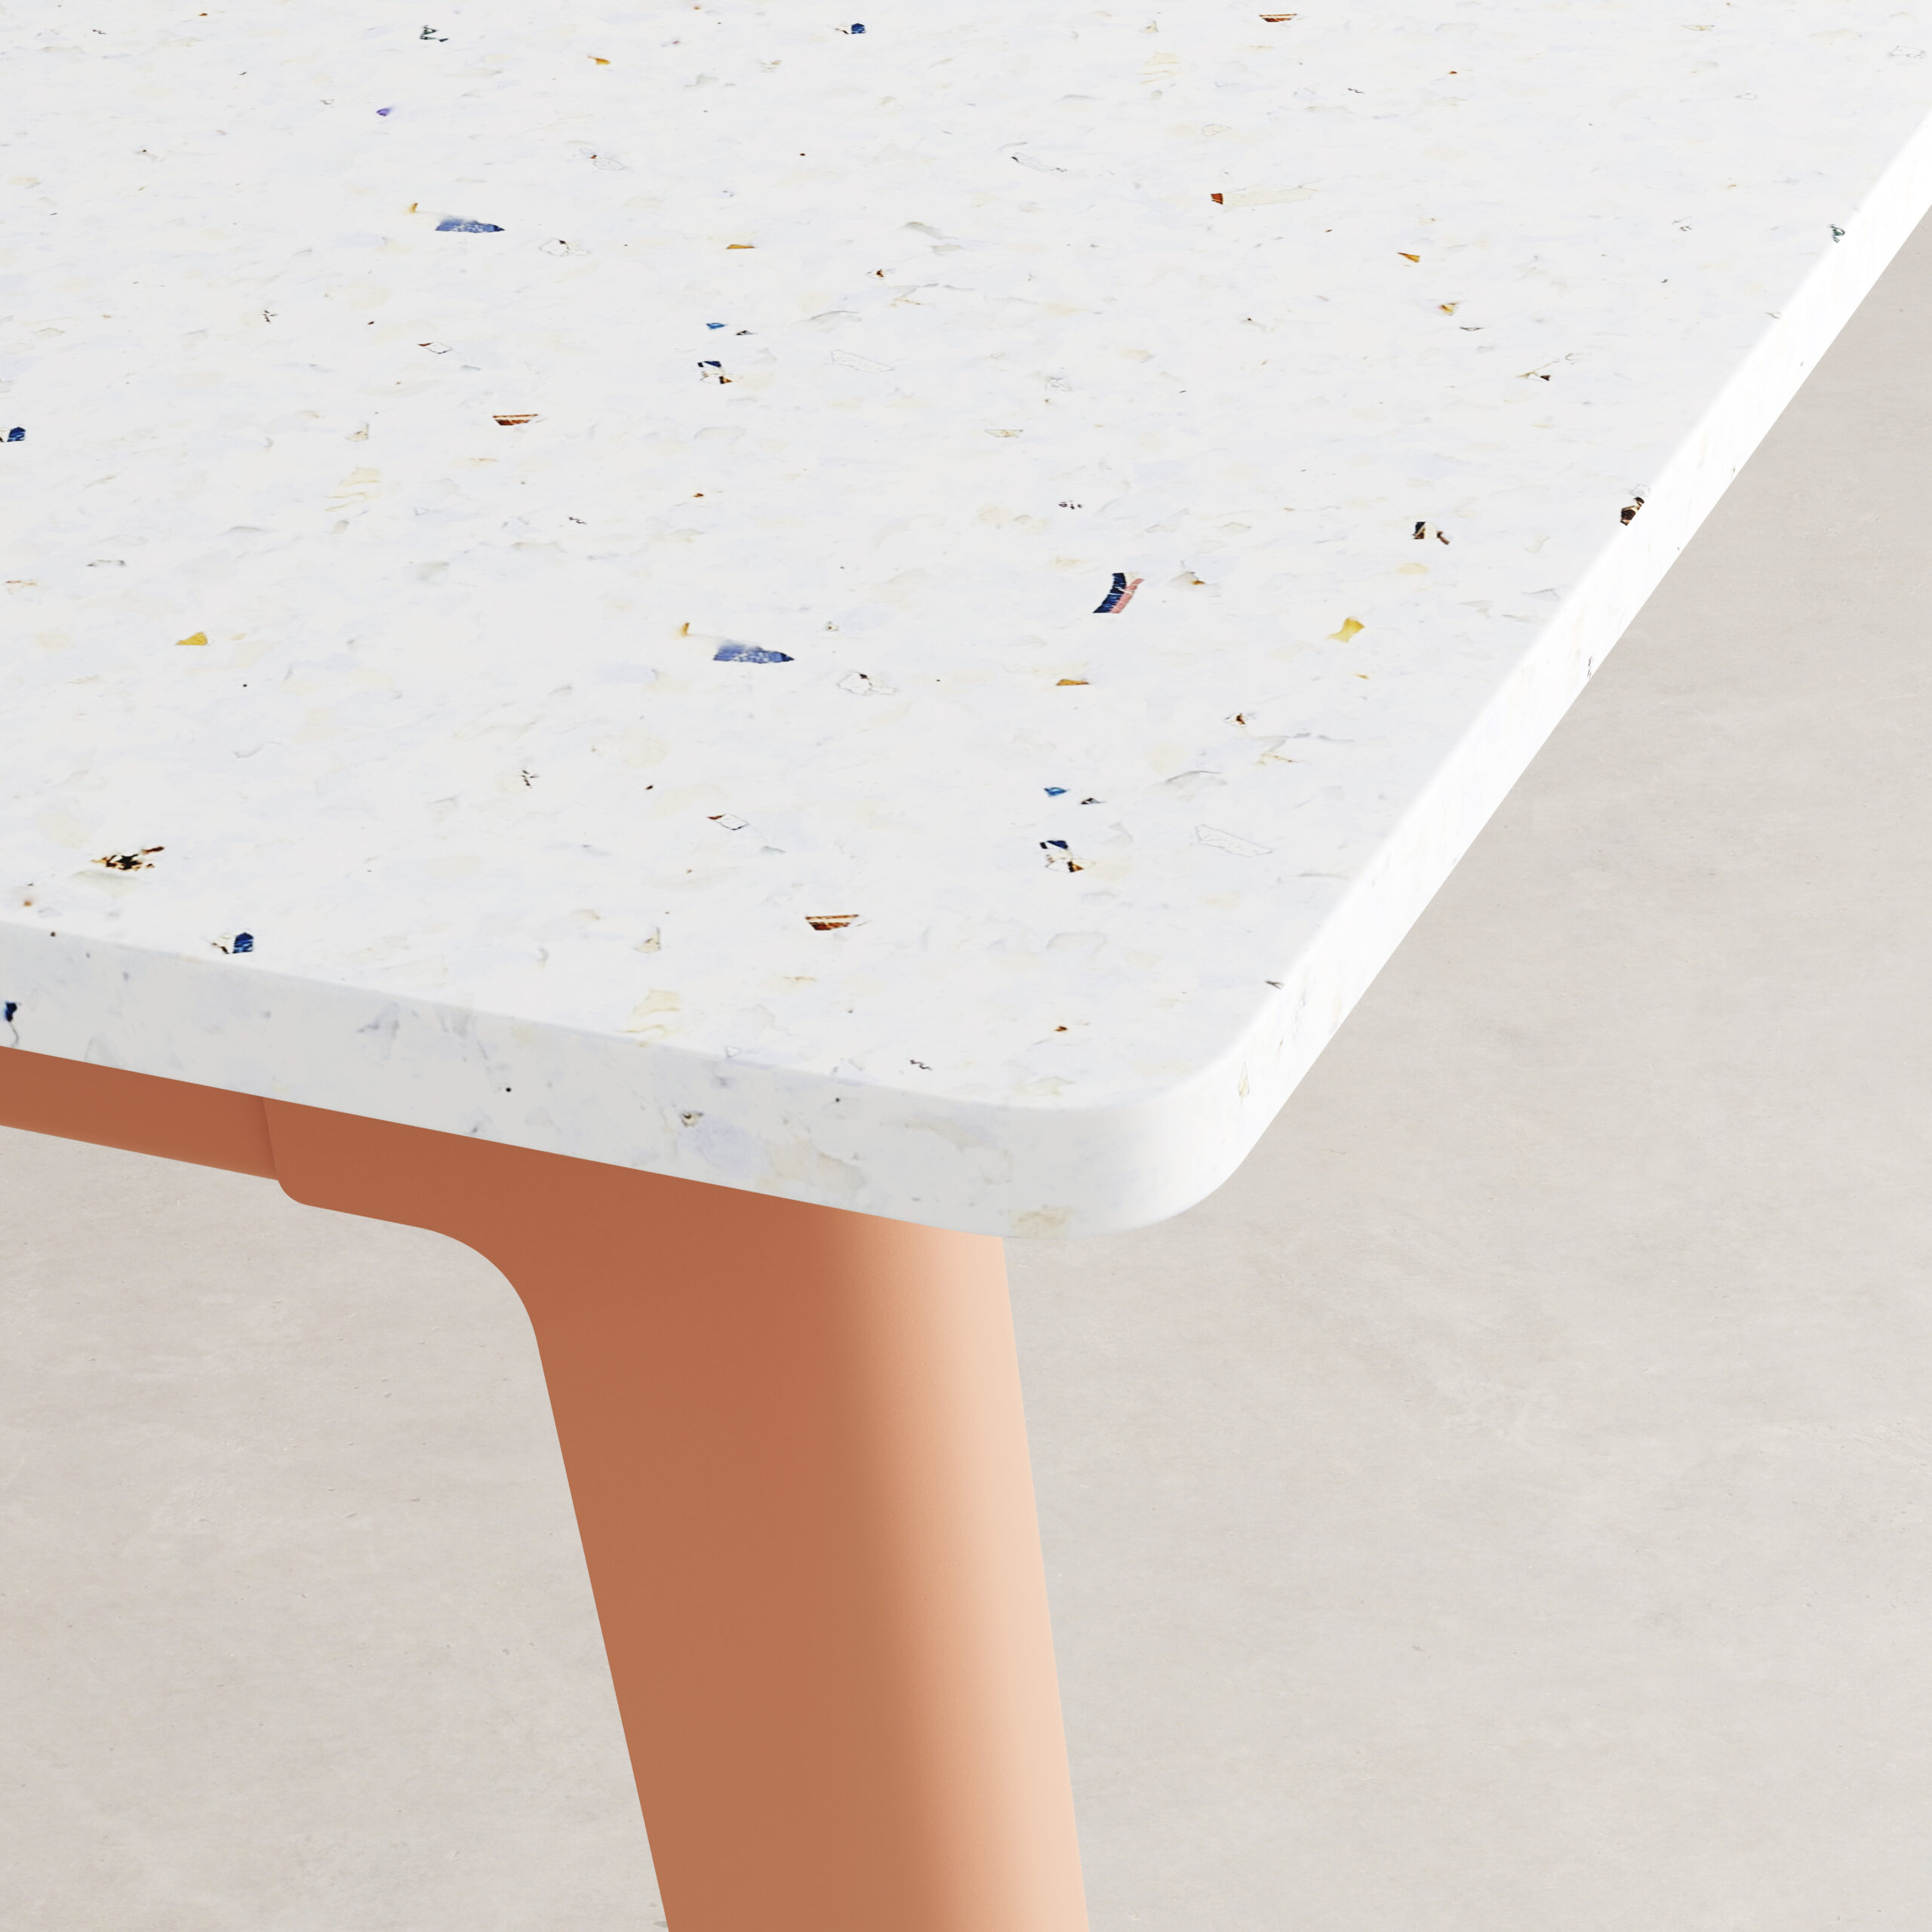 NEW MODERN dining table – recycled plastic